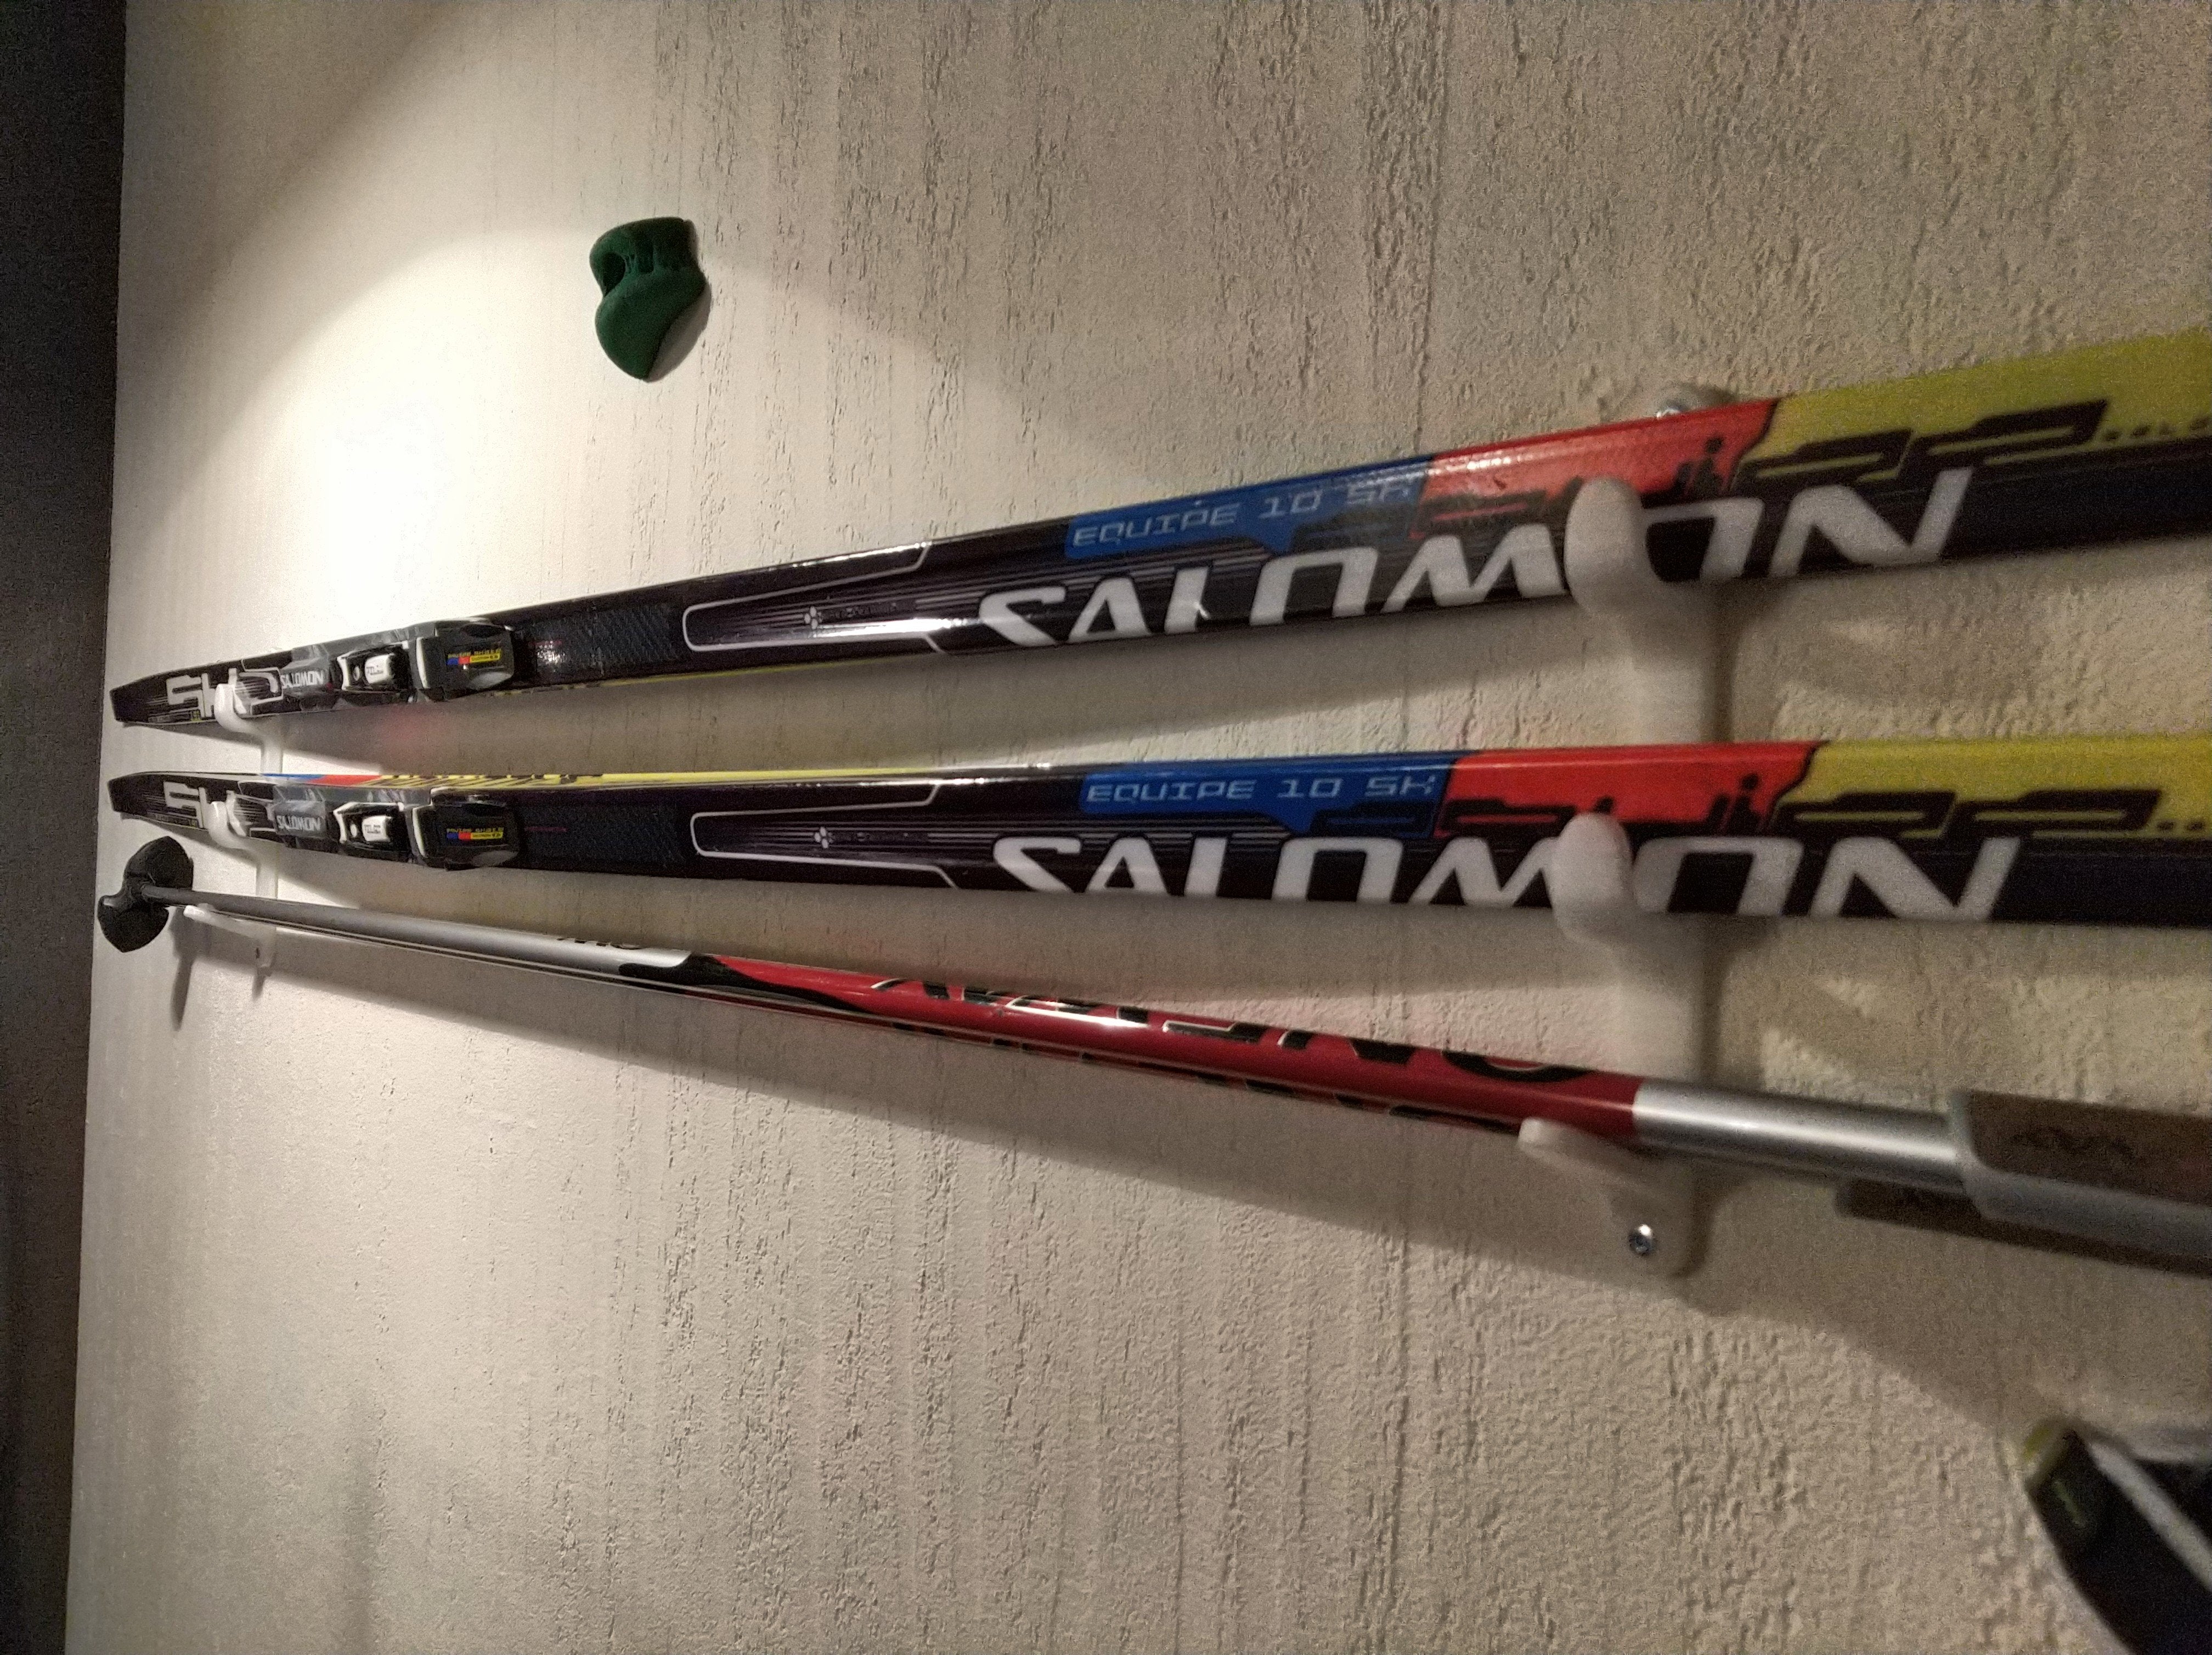 Wall mount for skis and poles